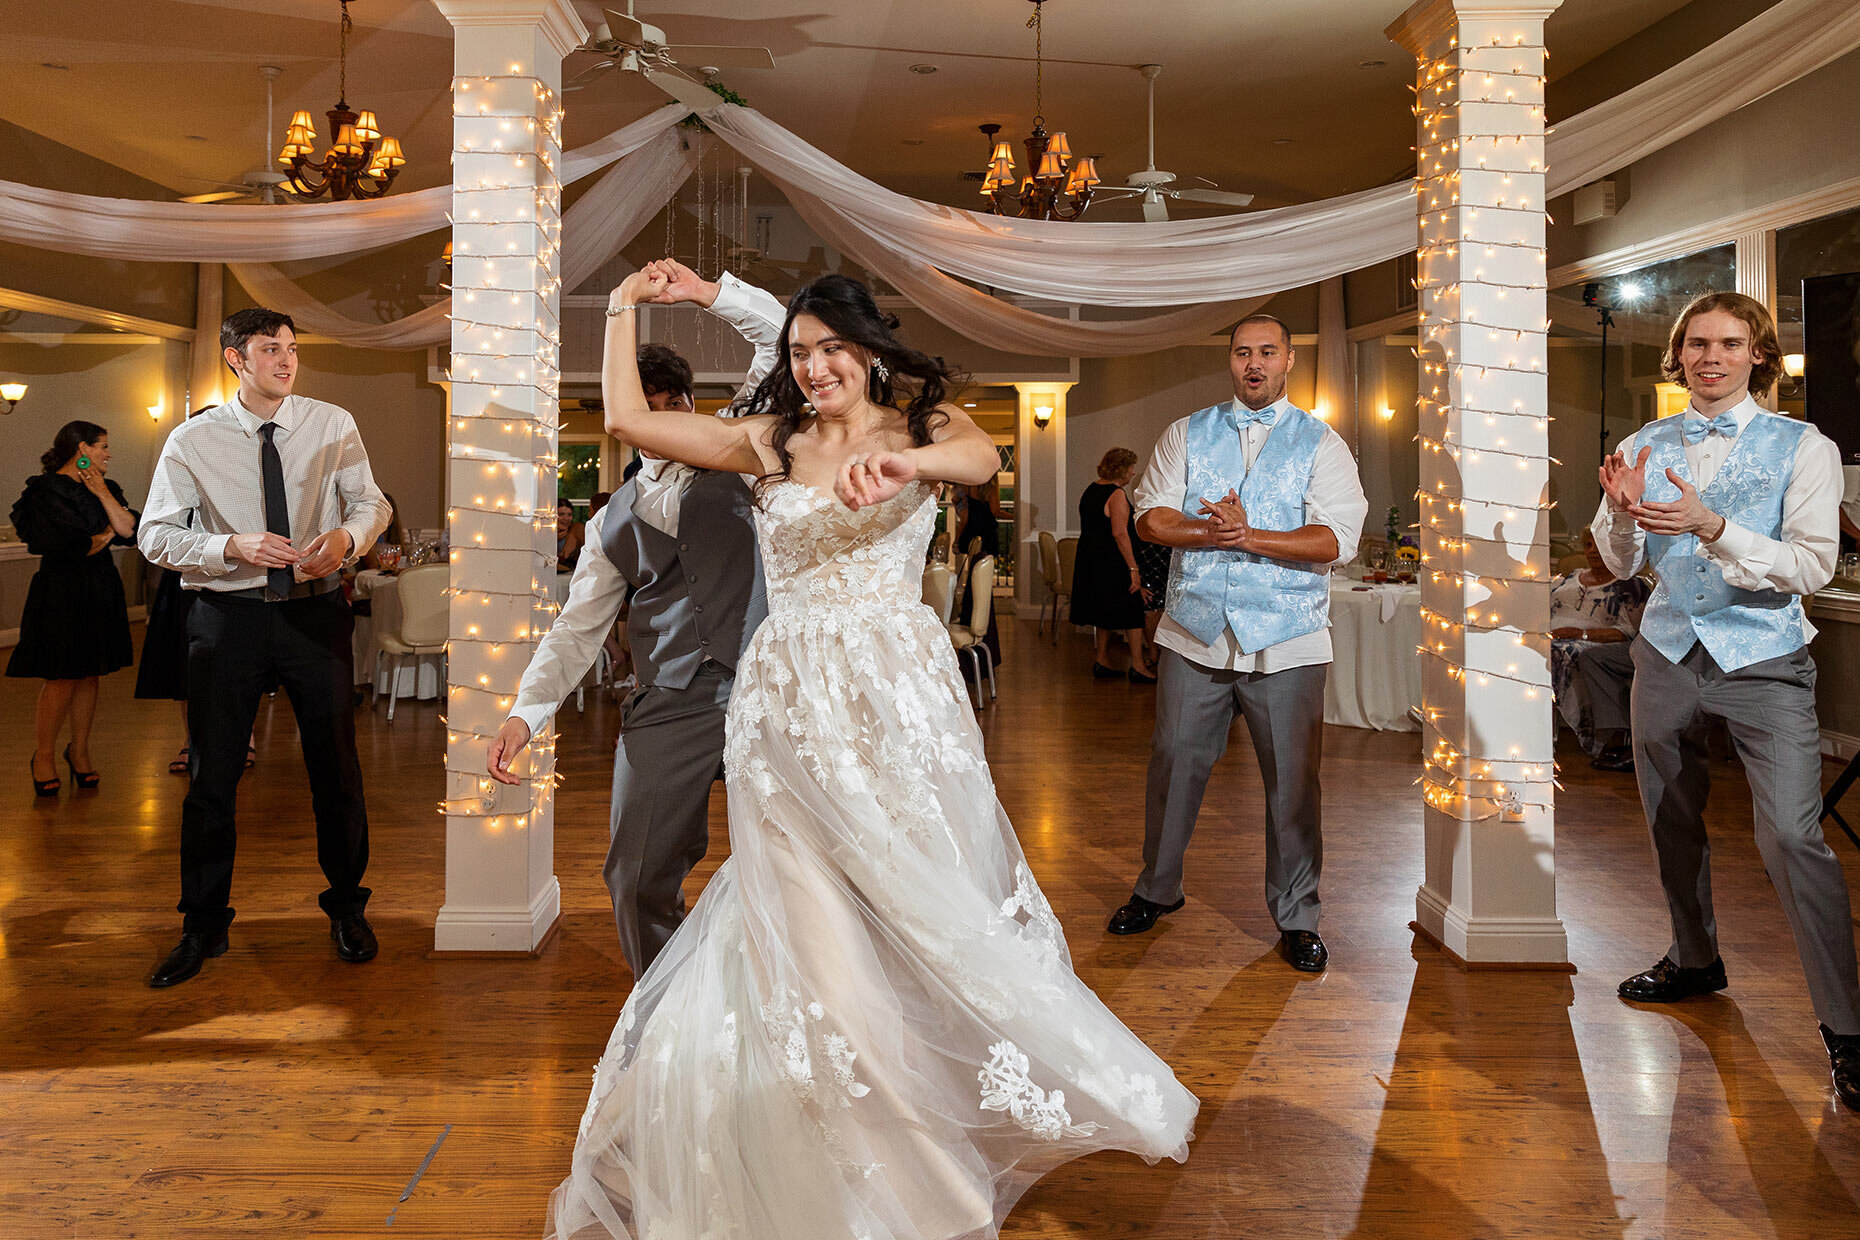 Bride and groom twirl at reception	